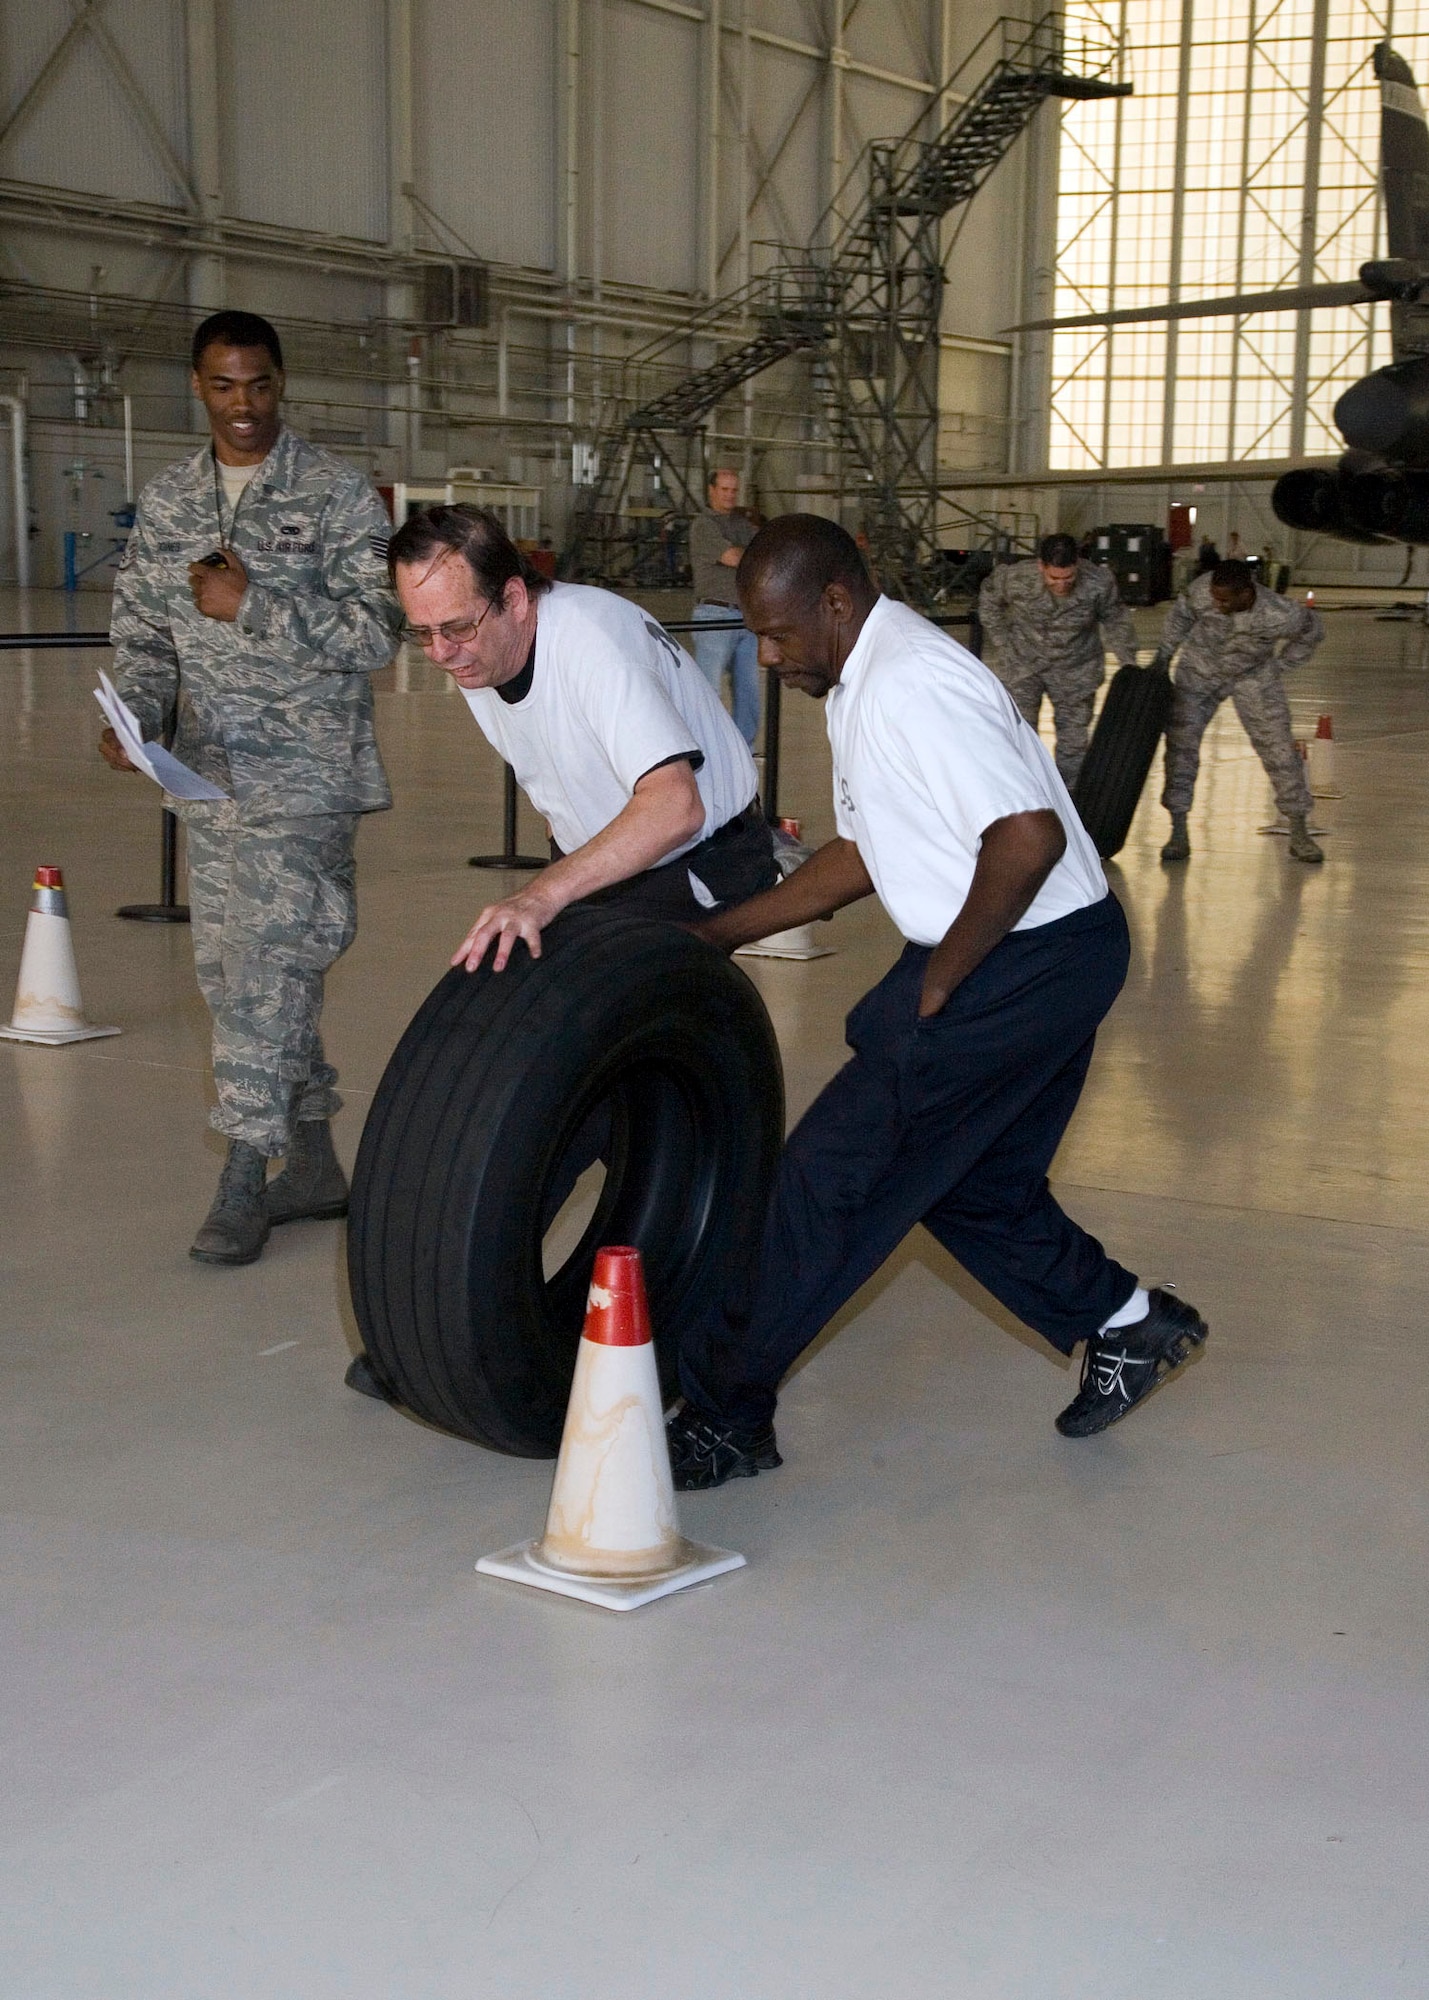 Maintainers roll large tires as part of the 412th Maintenance Group's Maintenance Olympics. After three hours of competition, the 412 Aircraft Maintenance Squadron came out as the victor and took home the highly-coveted first place 412th MXG Maintenance Olympics Wrench. The 412th Logistics Test Squadron took second while the 412th MXG staff took third. (Air Force photo by Chad Bellay)